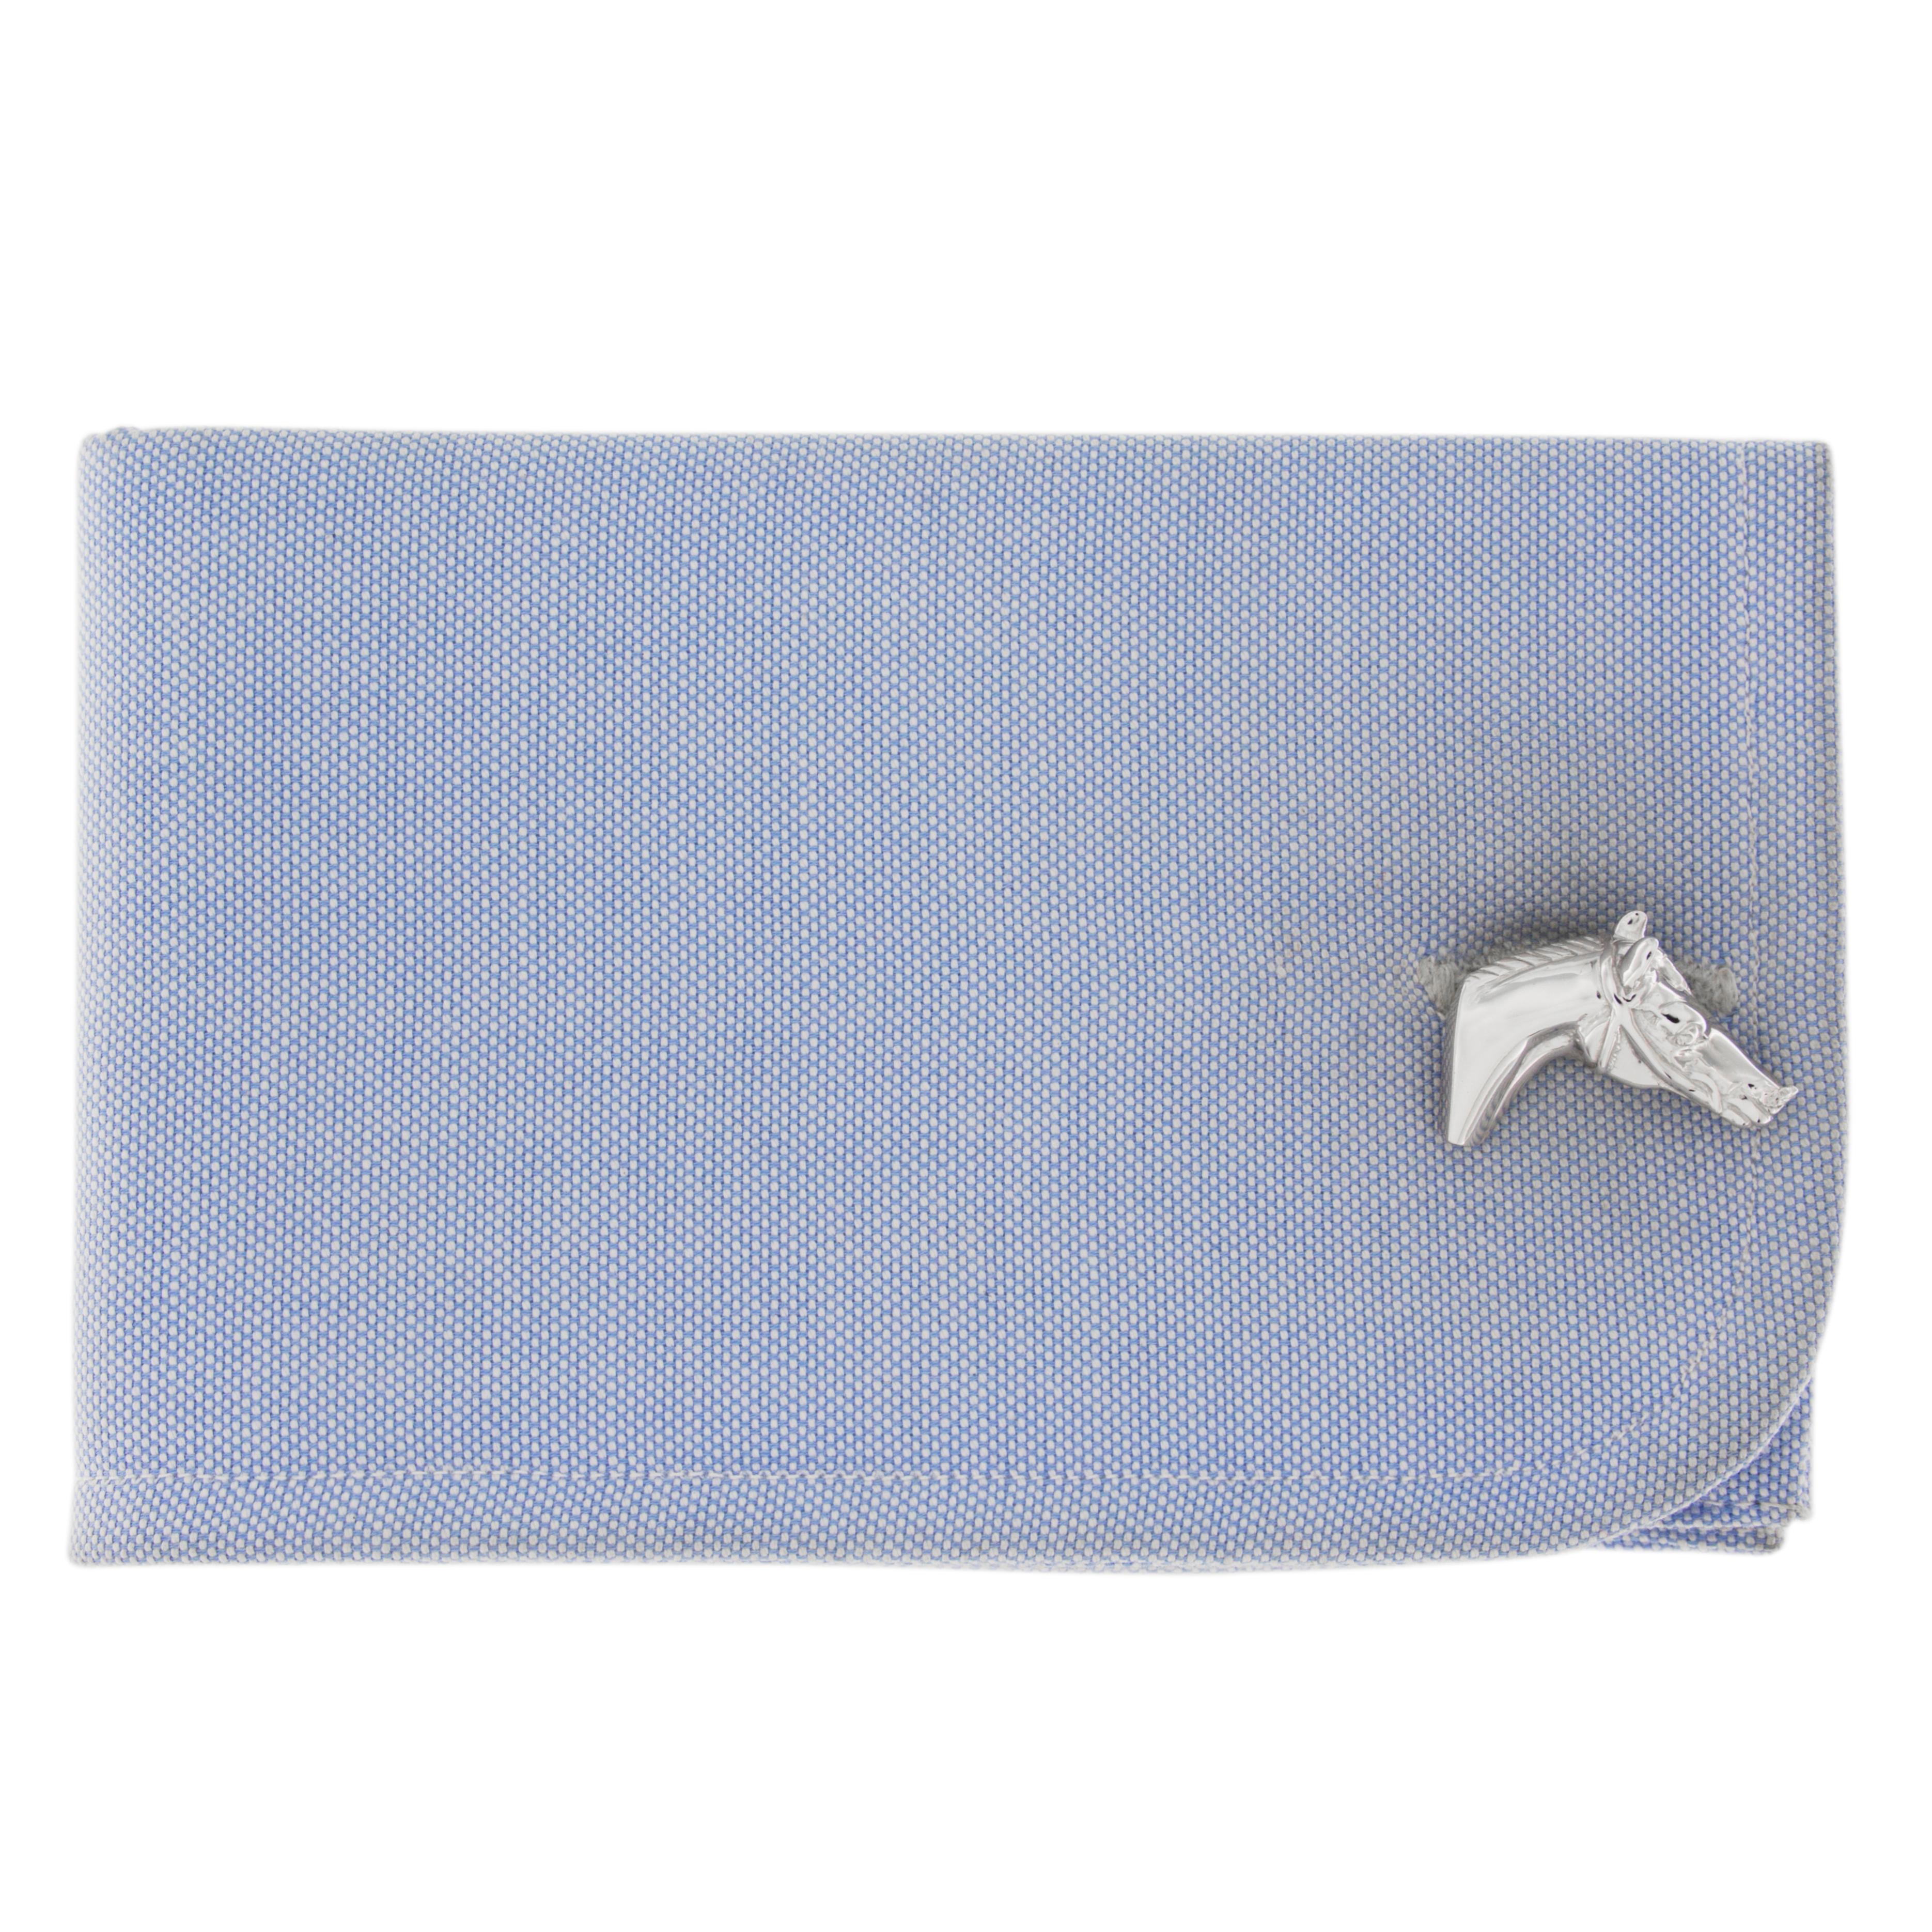 Jona design collection, hand crafted in Italy, rhodium plated sterling silver horse head cufflinks. Marked JONA 925.  All Jona jewelry is new and has never been previously owned or worn. Each item will arrive at your door beautifully gift wrapped in